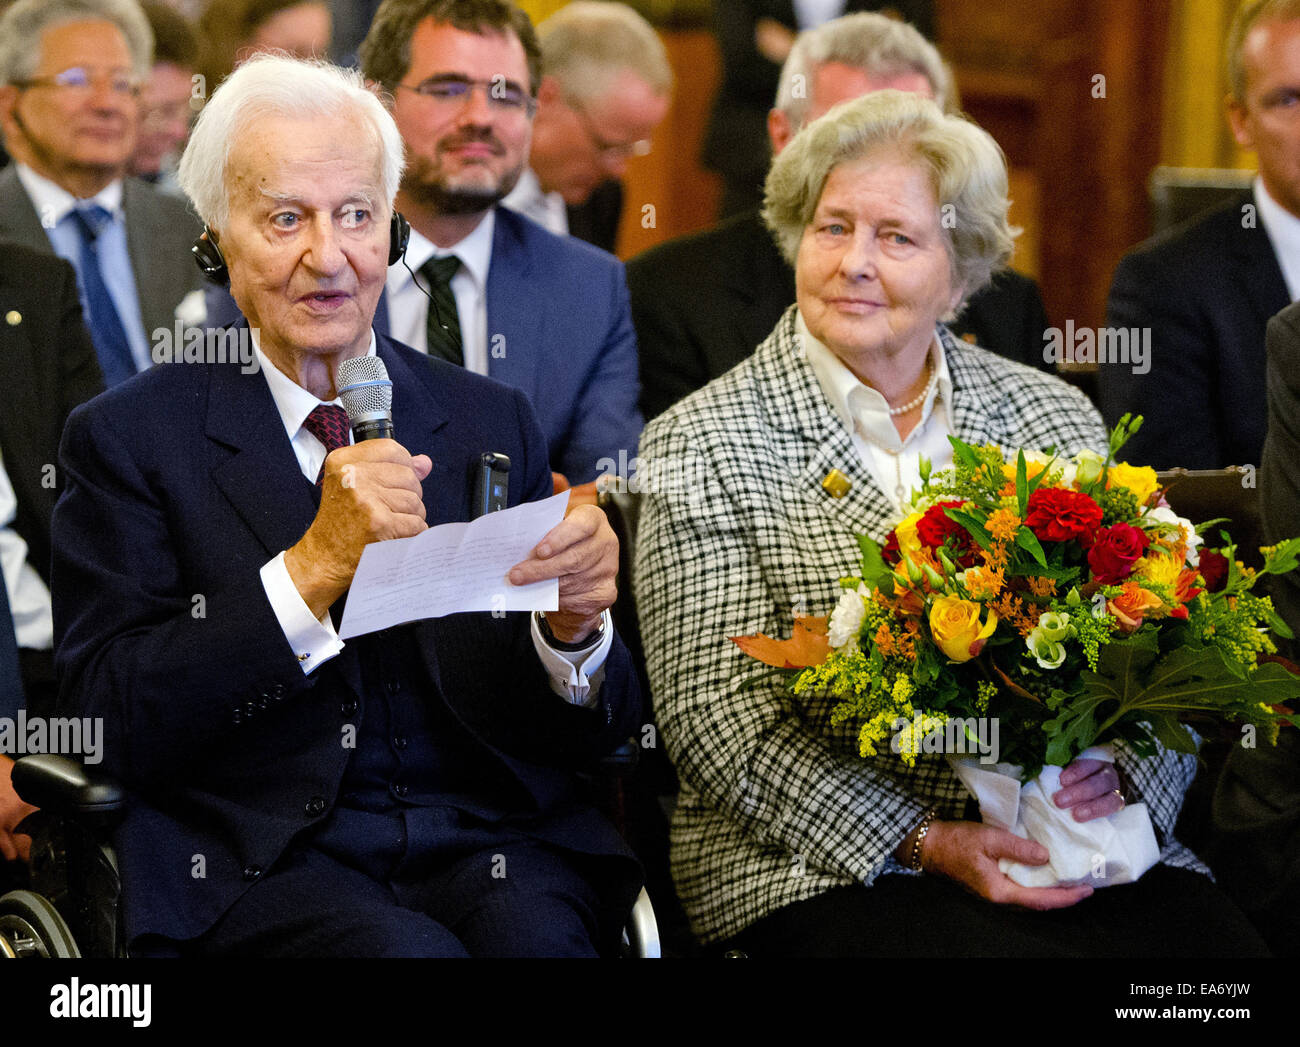 Hamburg, Germany. 07th Nov, 2014. Former German President Richard von Weizsaecker sits next to his wife Marianne in city hall in Hamburg, Germany, 07 November 2014. Weizsaecker is leaving his position as chairman of the Bergedorf Discussion Circle of the Koerber Foundation. Photo: DANIEL BOCKWOLDT/dpa/Alamy Live News Stock Photo